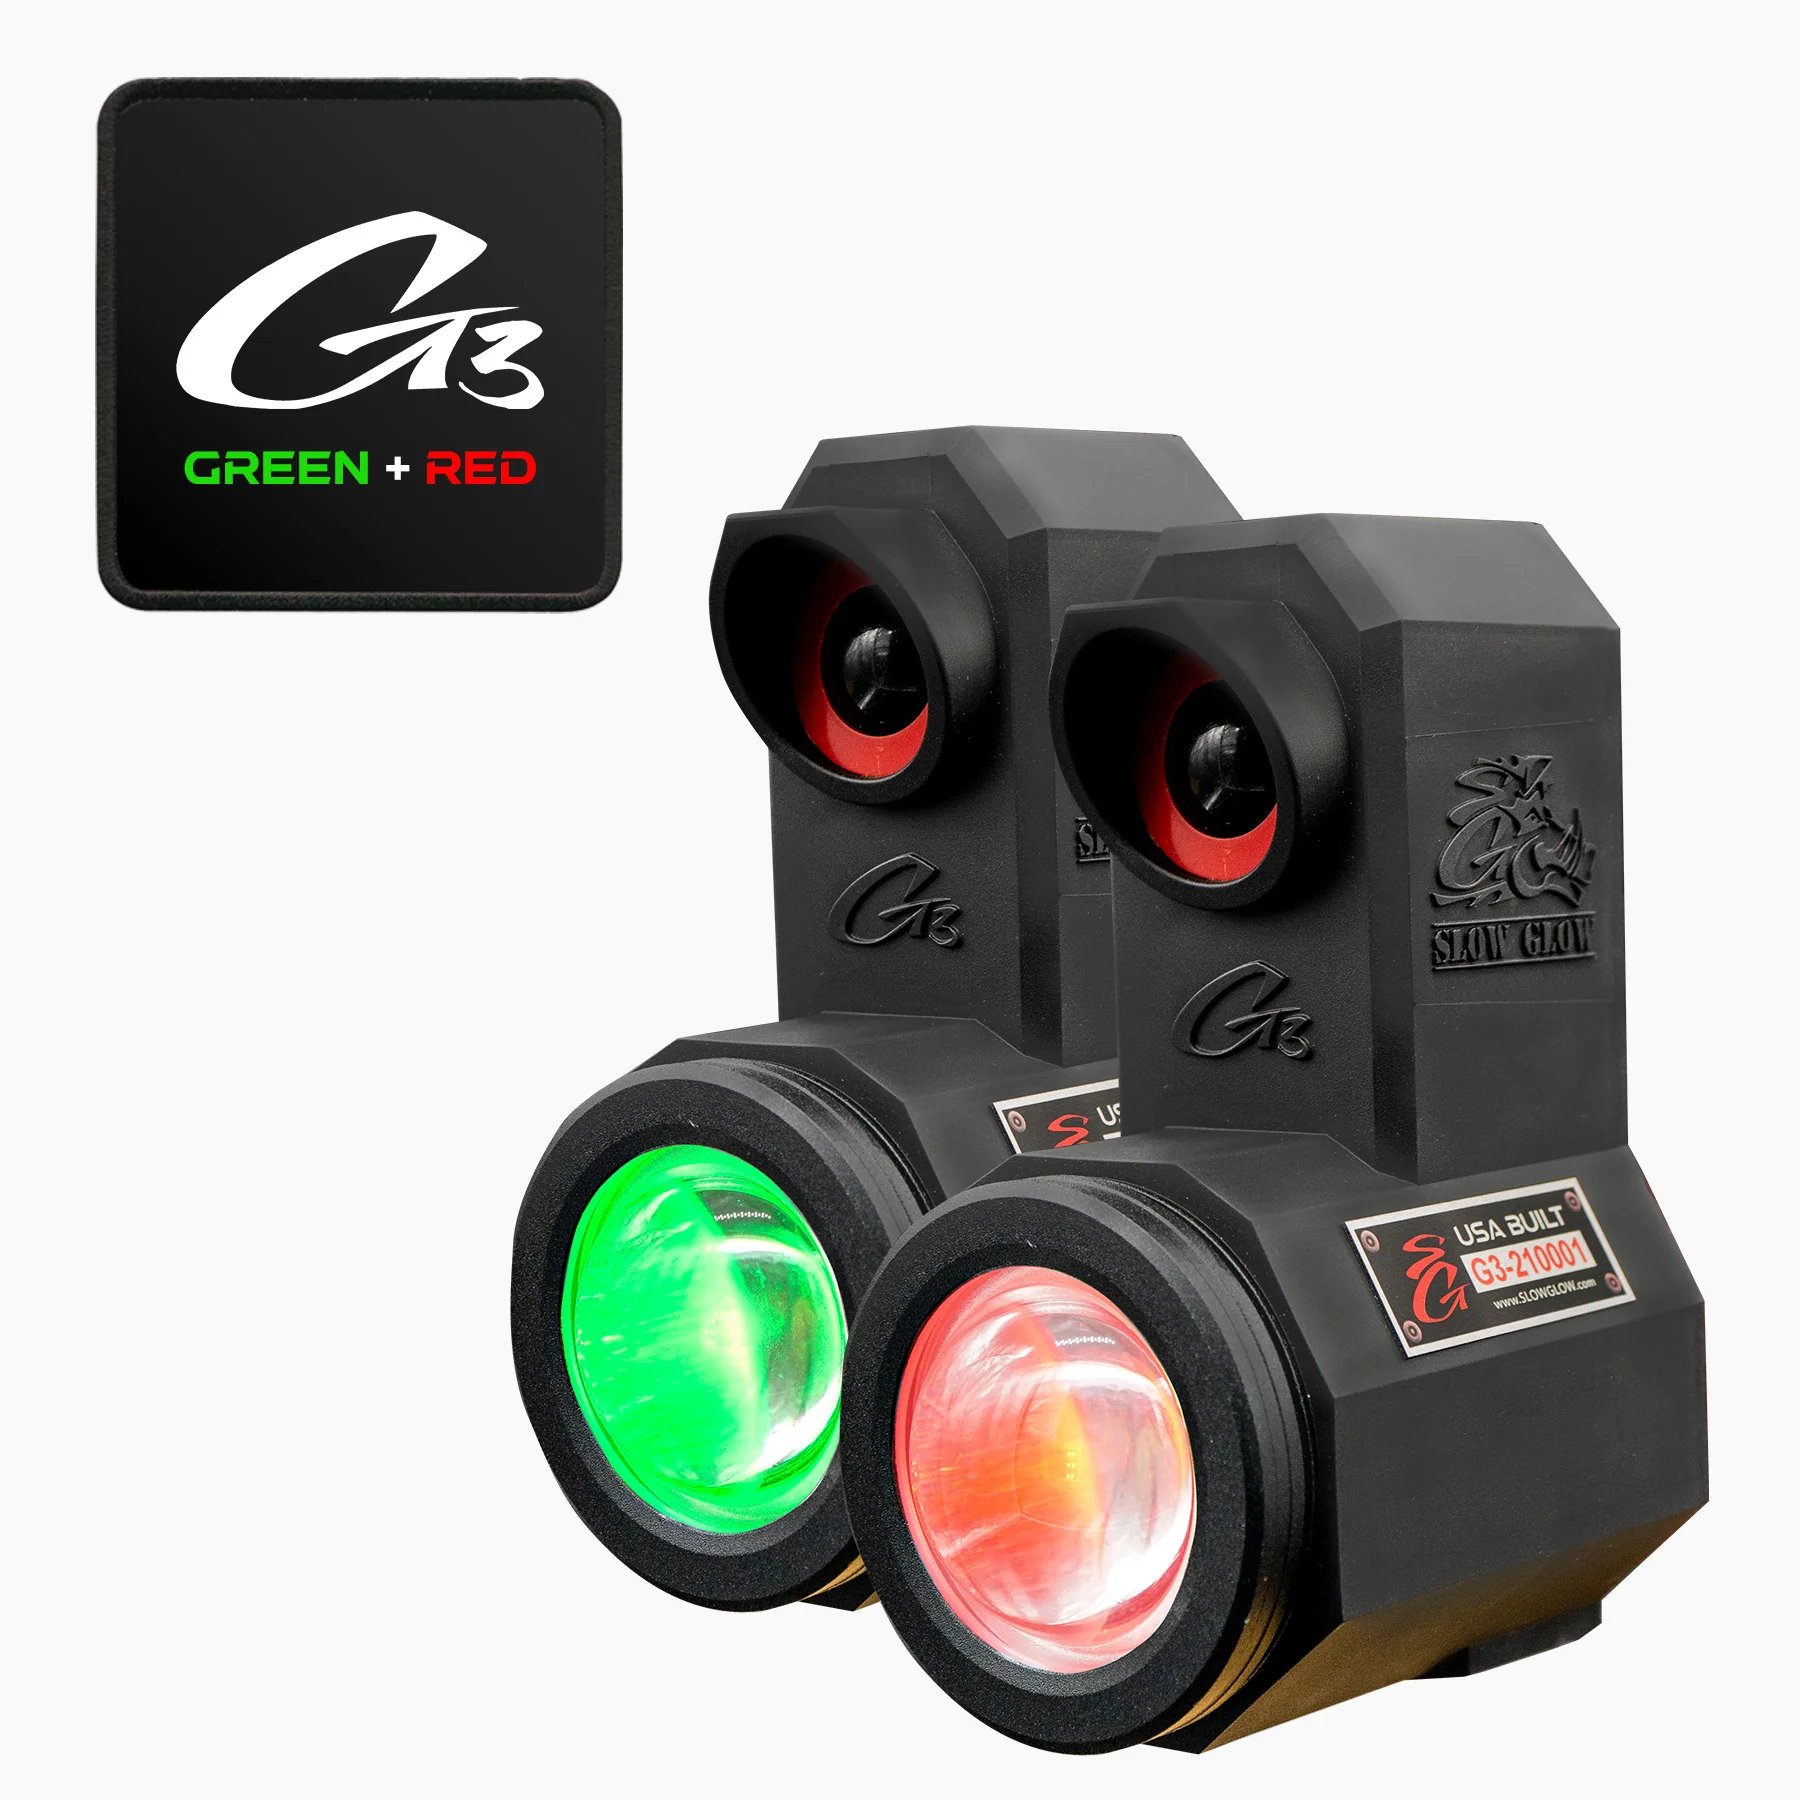 Slow Glow G3 Hunting Light Questions & Answers